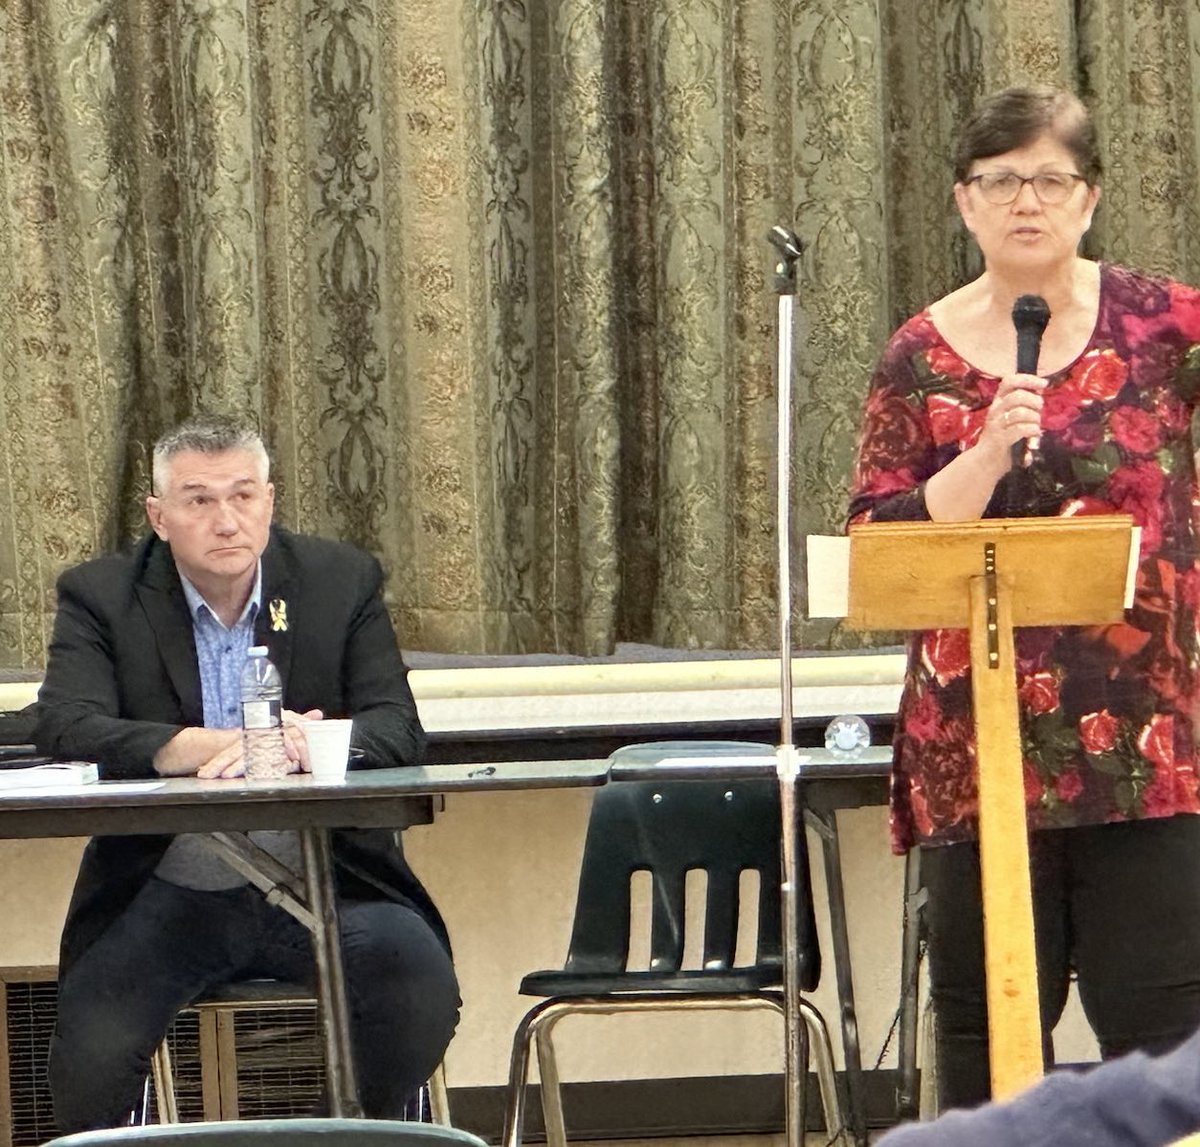 I had the pleasure of speaking at the Rural Municipality of Fisher's town hall last night. It was great meeting with representatives from all levels of government to discuss the issues that are impacting rural Canadians.